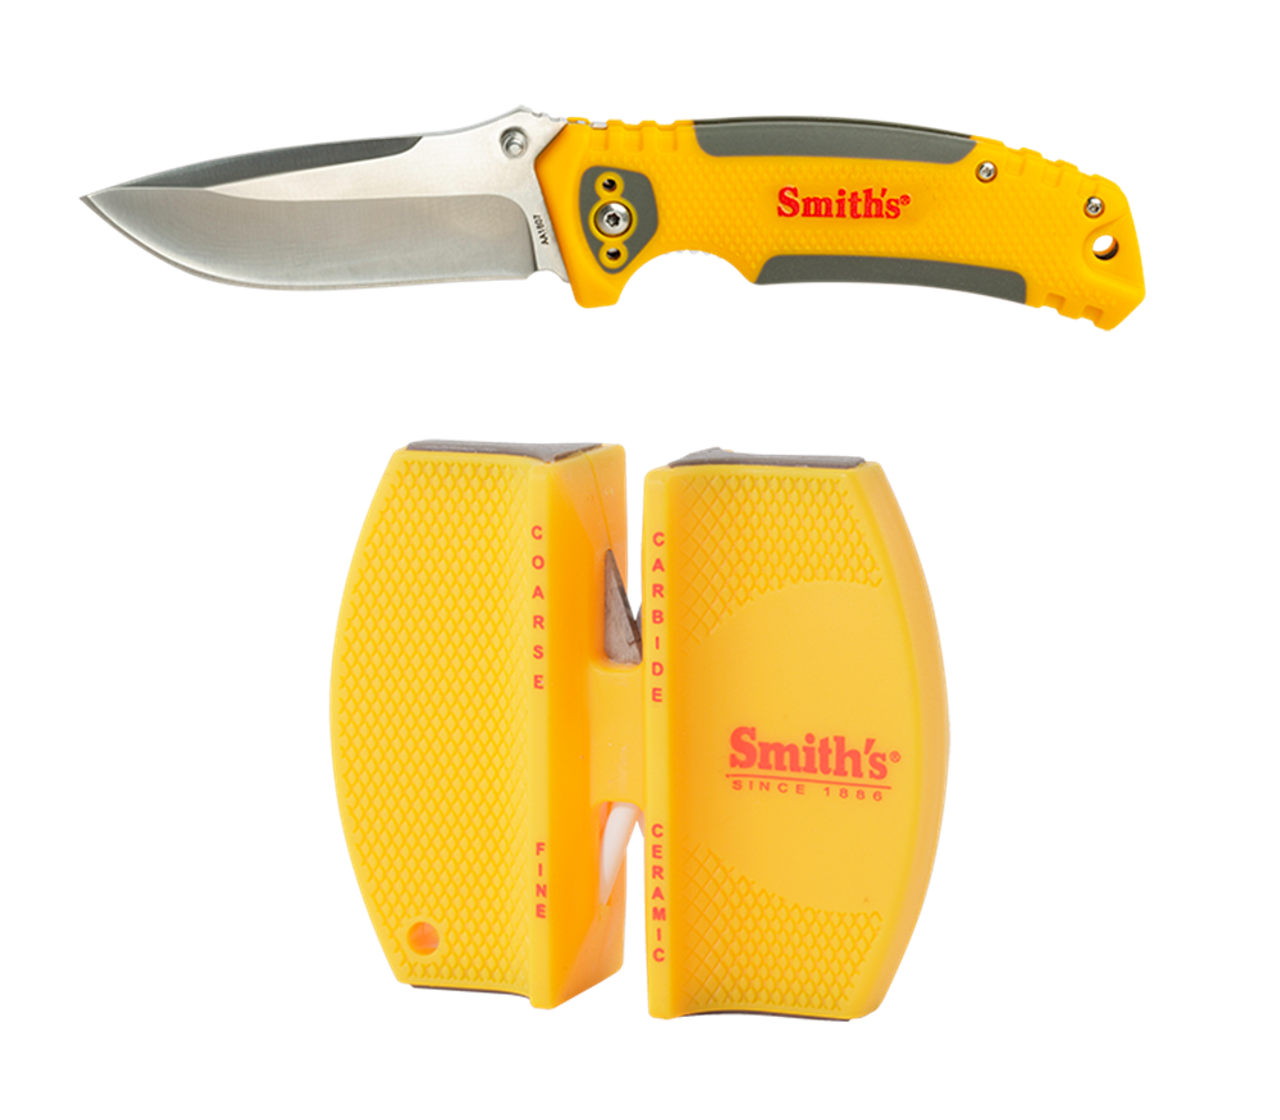 Smith's Edge Sport Knife and Sharpener Combo 420 Stainless Steel 3.3" Blade